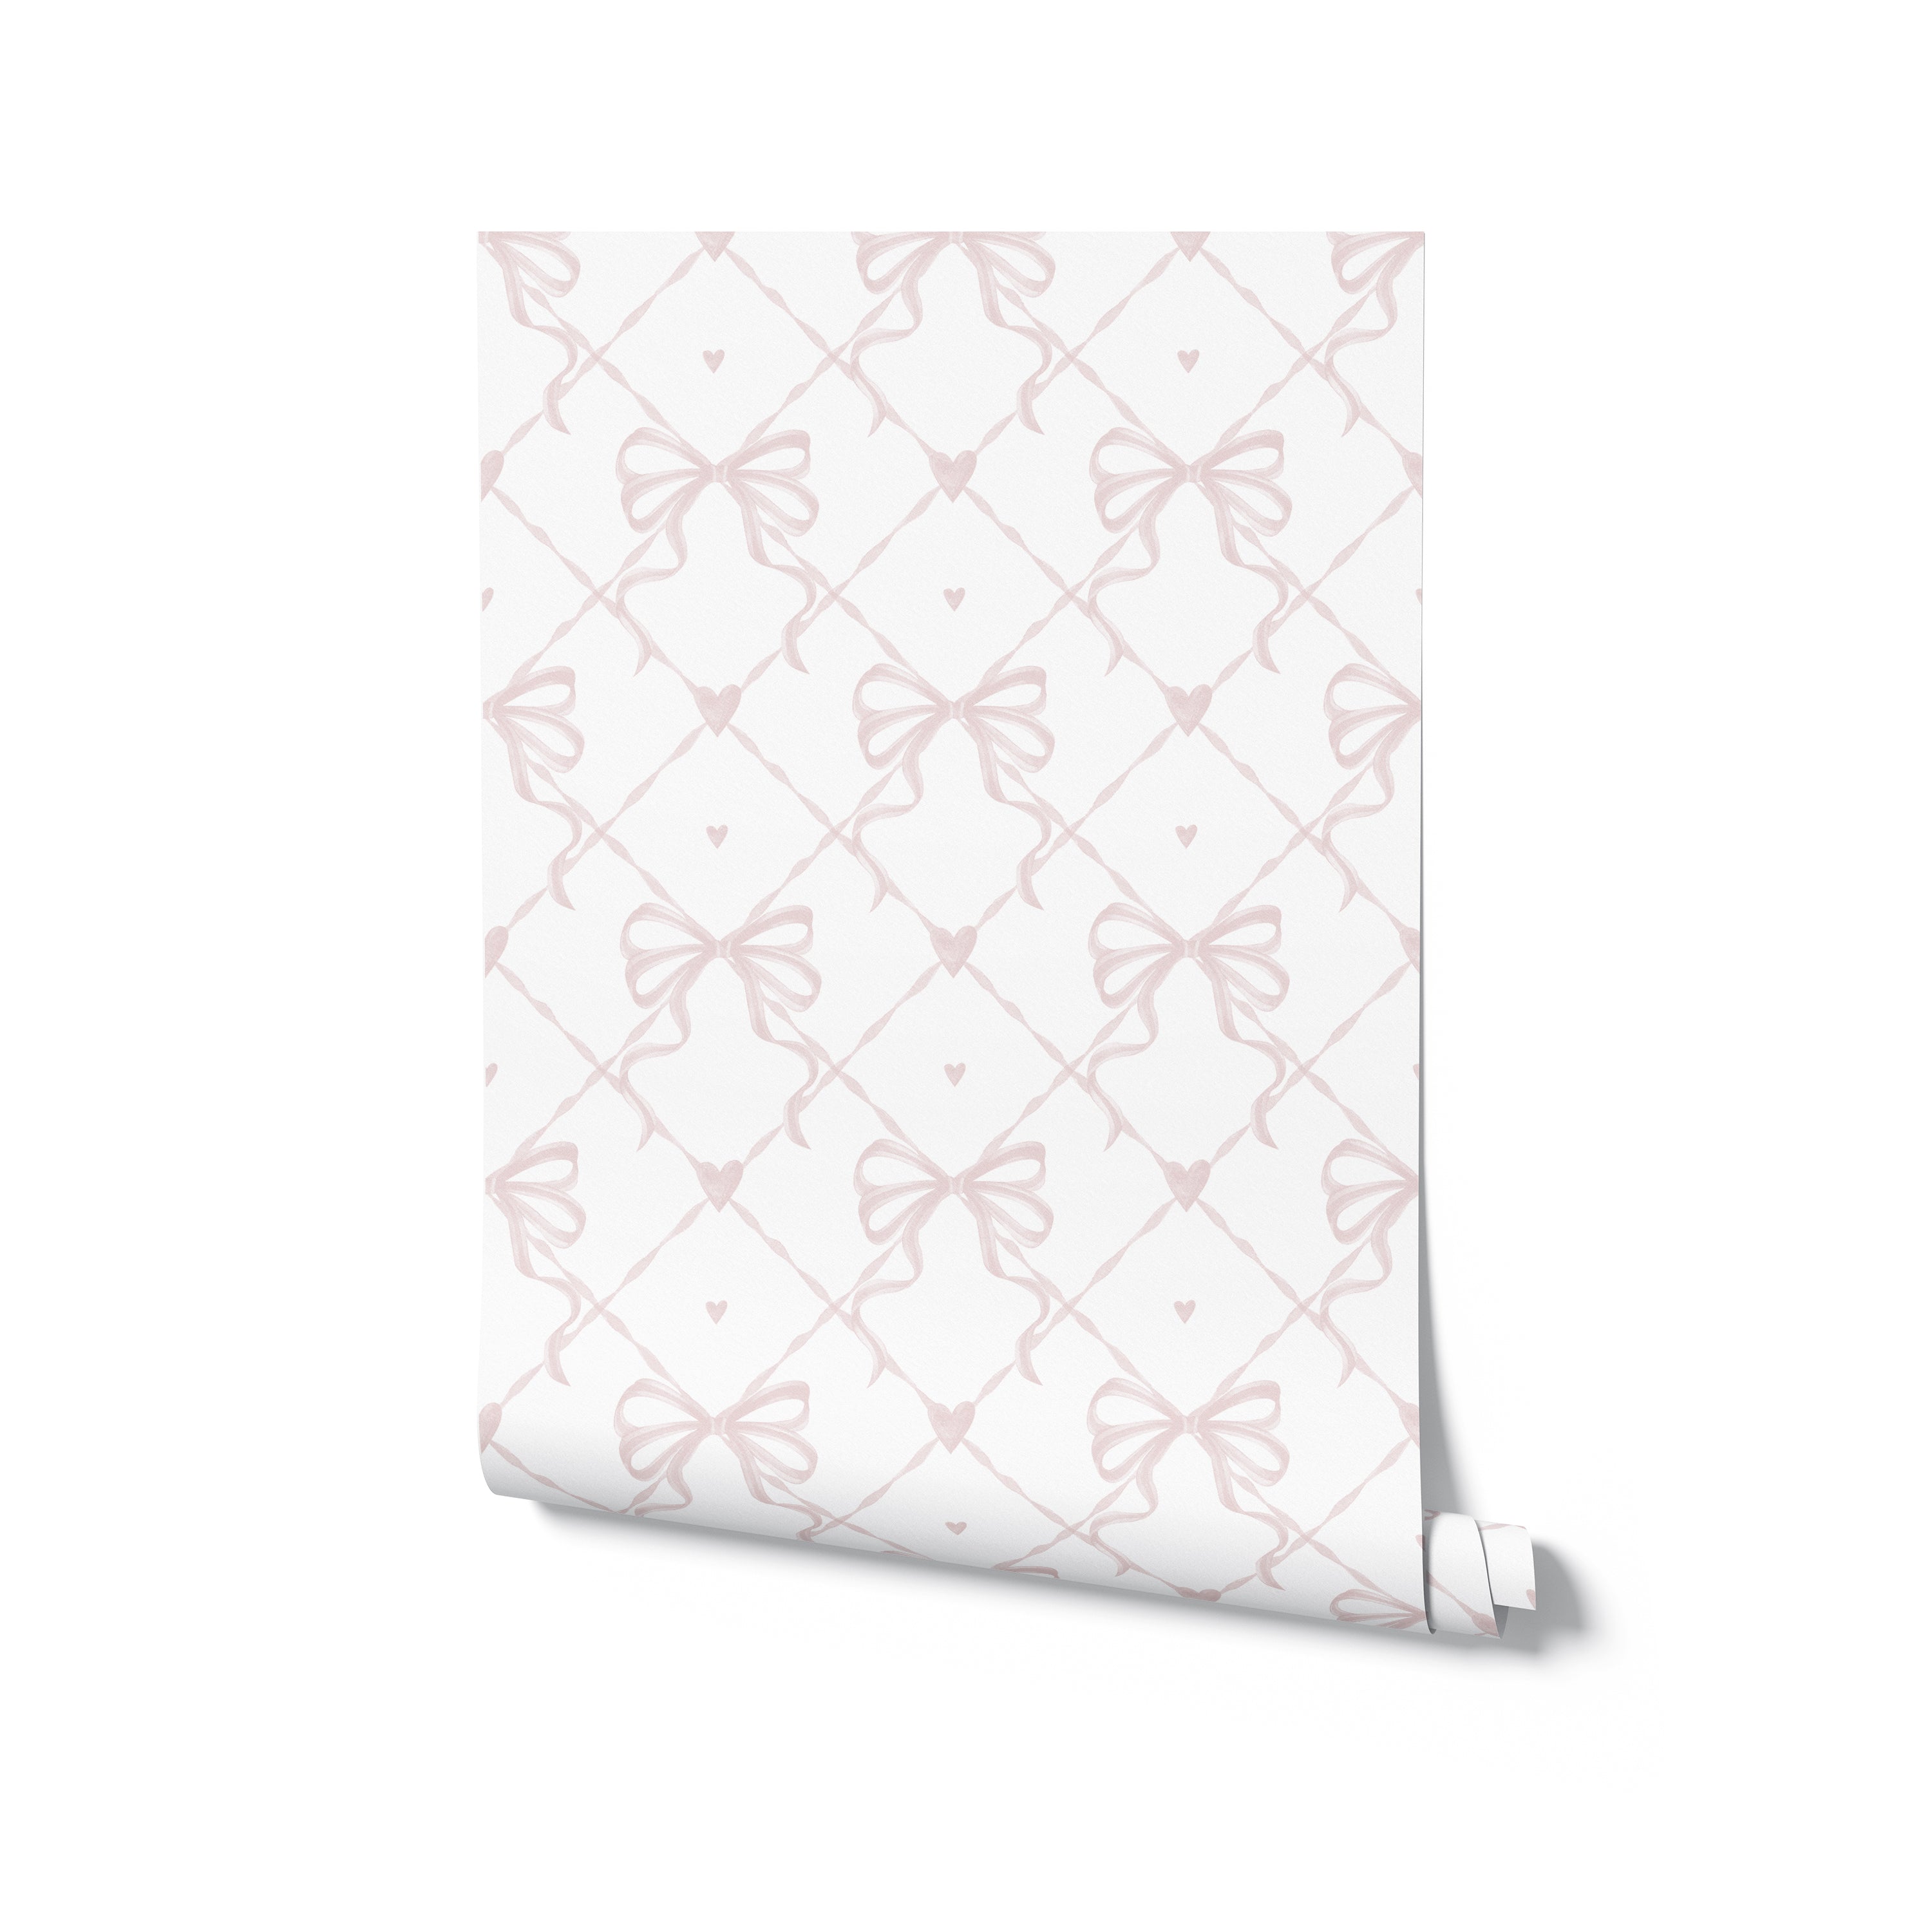 A roll of Delicate Watercolour Bows Wallpaper displaying the full design with elegant pink bows and small hearts on a crisp white background, ideal for adding a delicate and romantic touch to any room's decor.